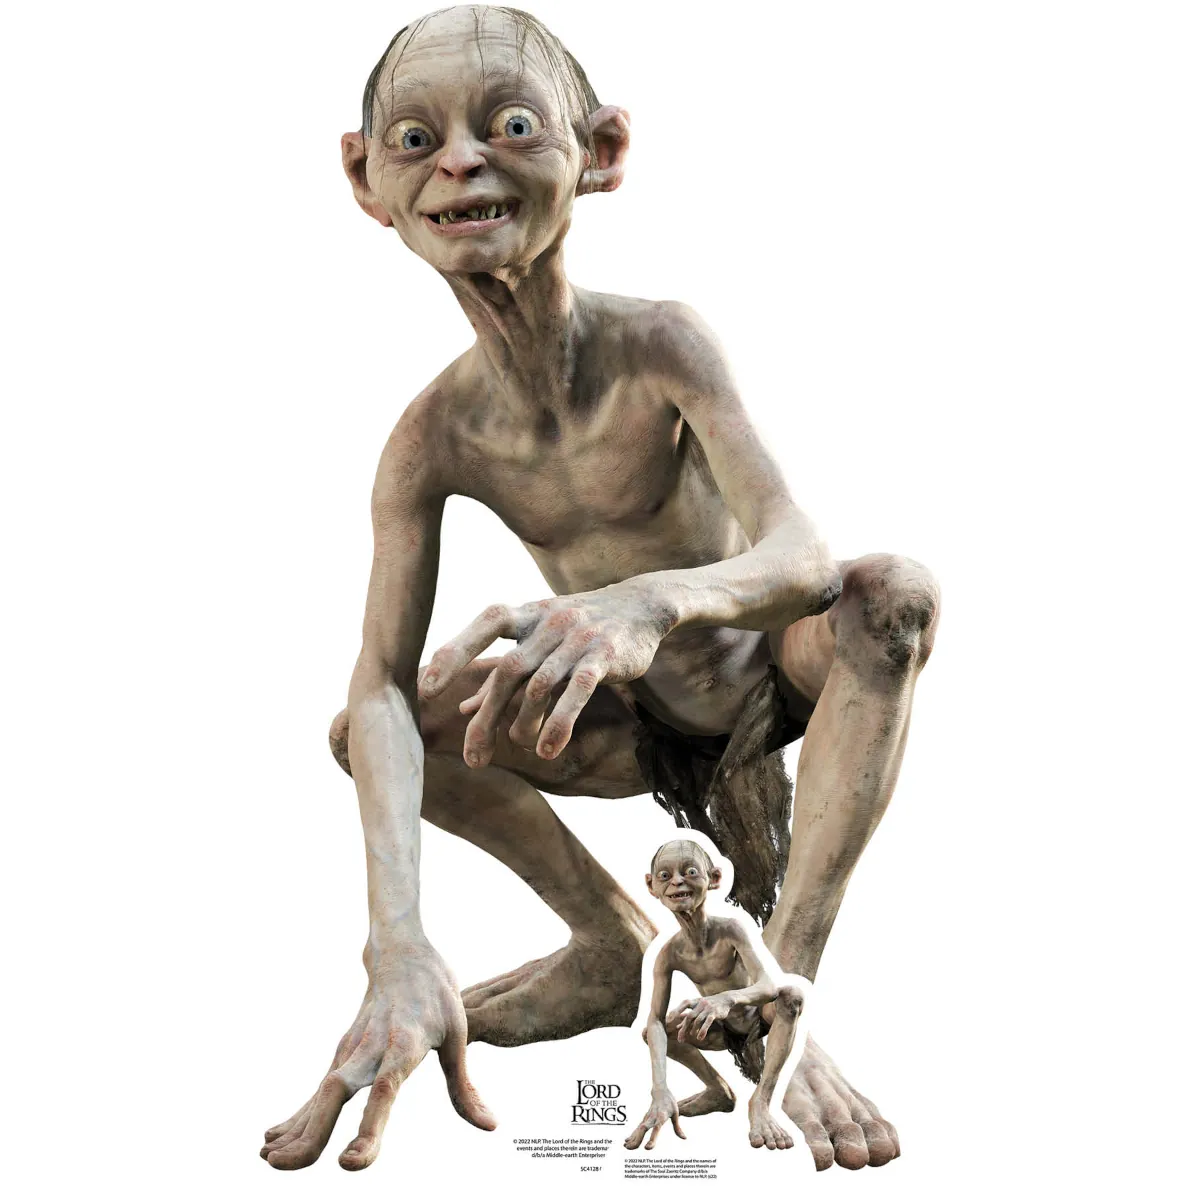 SC4128 Gollum (The Lord of the Rings) Official Lifesize + Mini Cardboard Cutout Standee Front